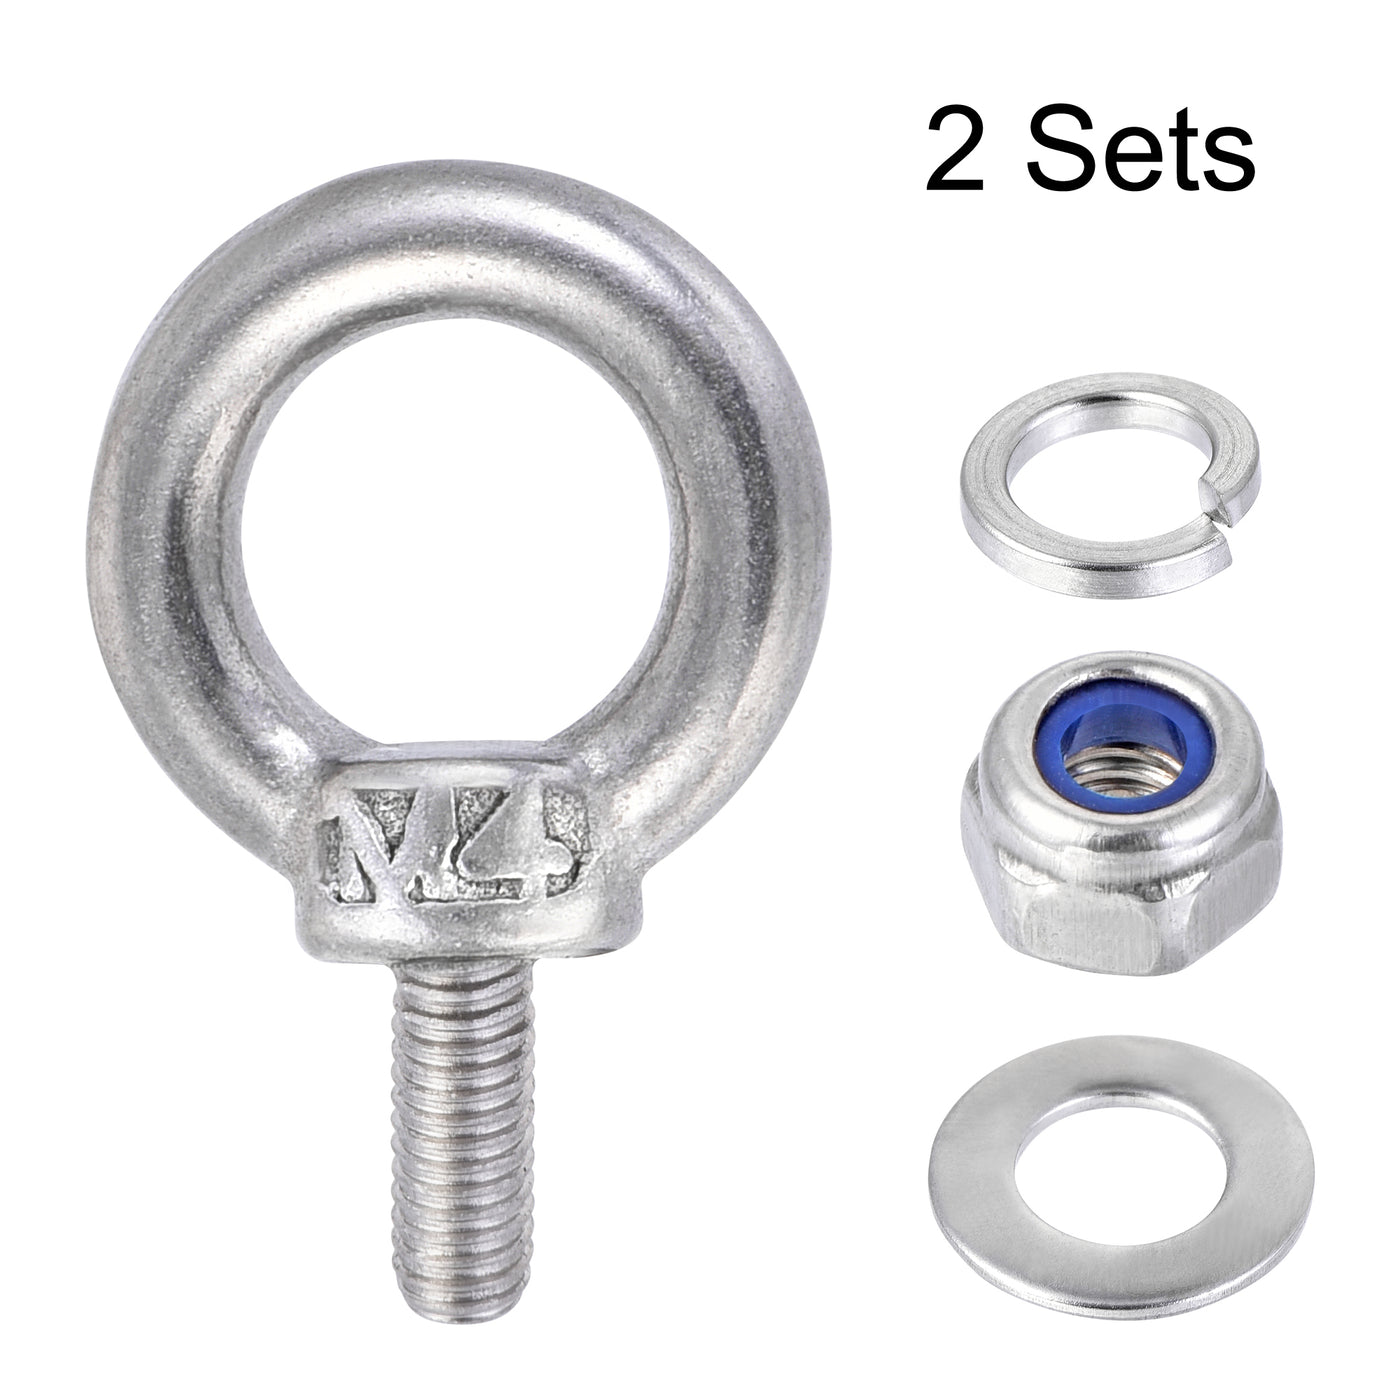 uxcell Uxcell Lifting Eye Bolt M4 x 11mm Male Thread with Hex Screw Nut Gasket Flat Washer for Hanging, 304 Stainless Steel, 2 Sets